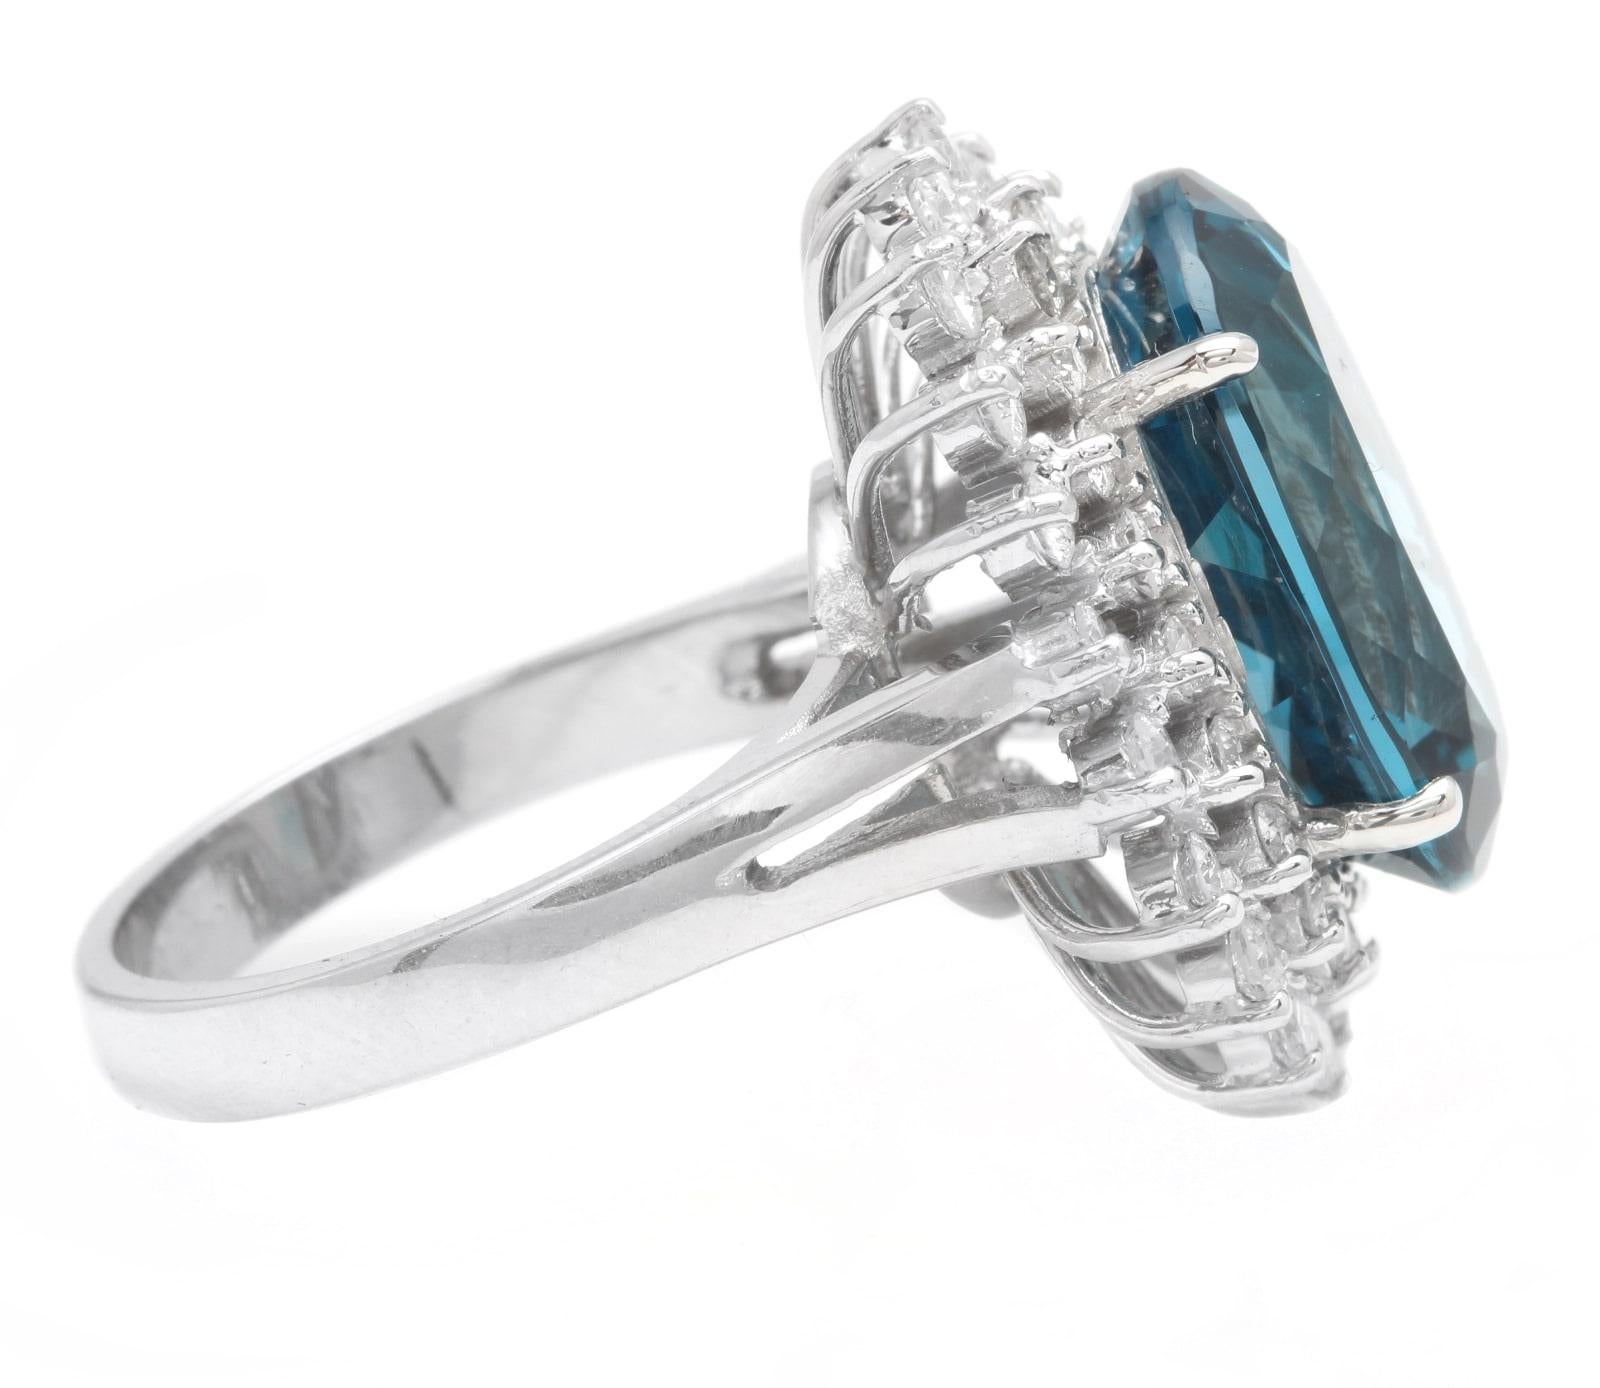 Mixed Cut 14.80 Ct Impressive Natural London Blue Topaz and Diamond 14K White Gold Ring For Sale